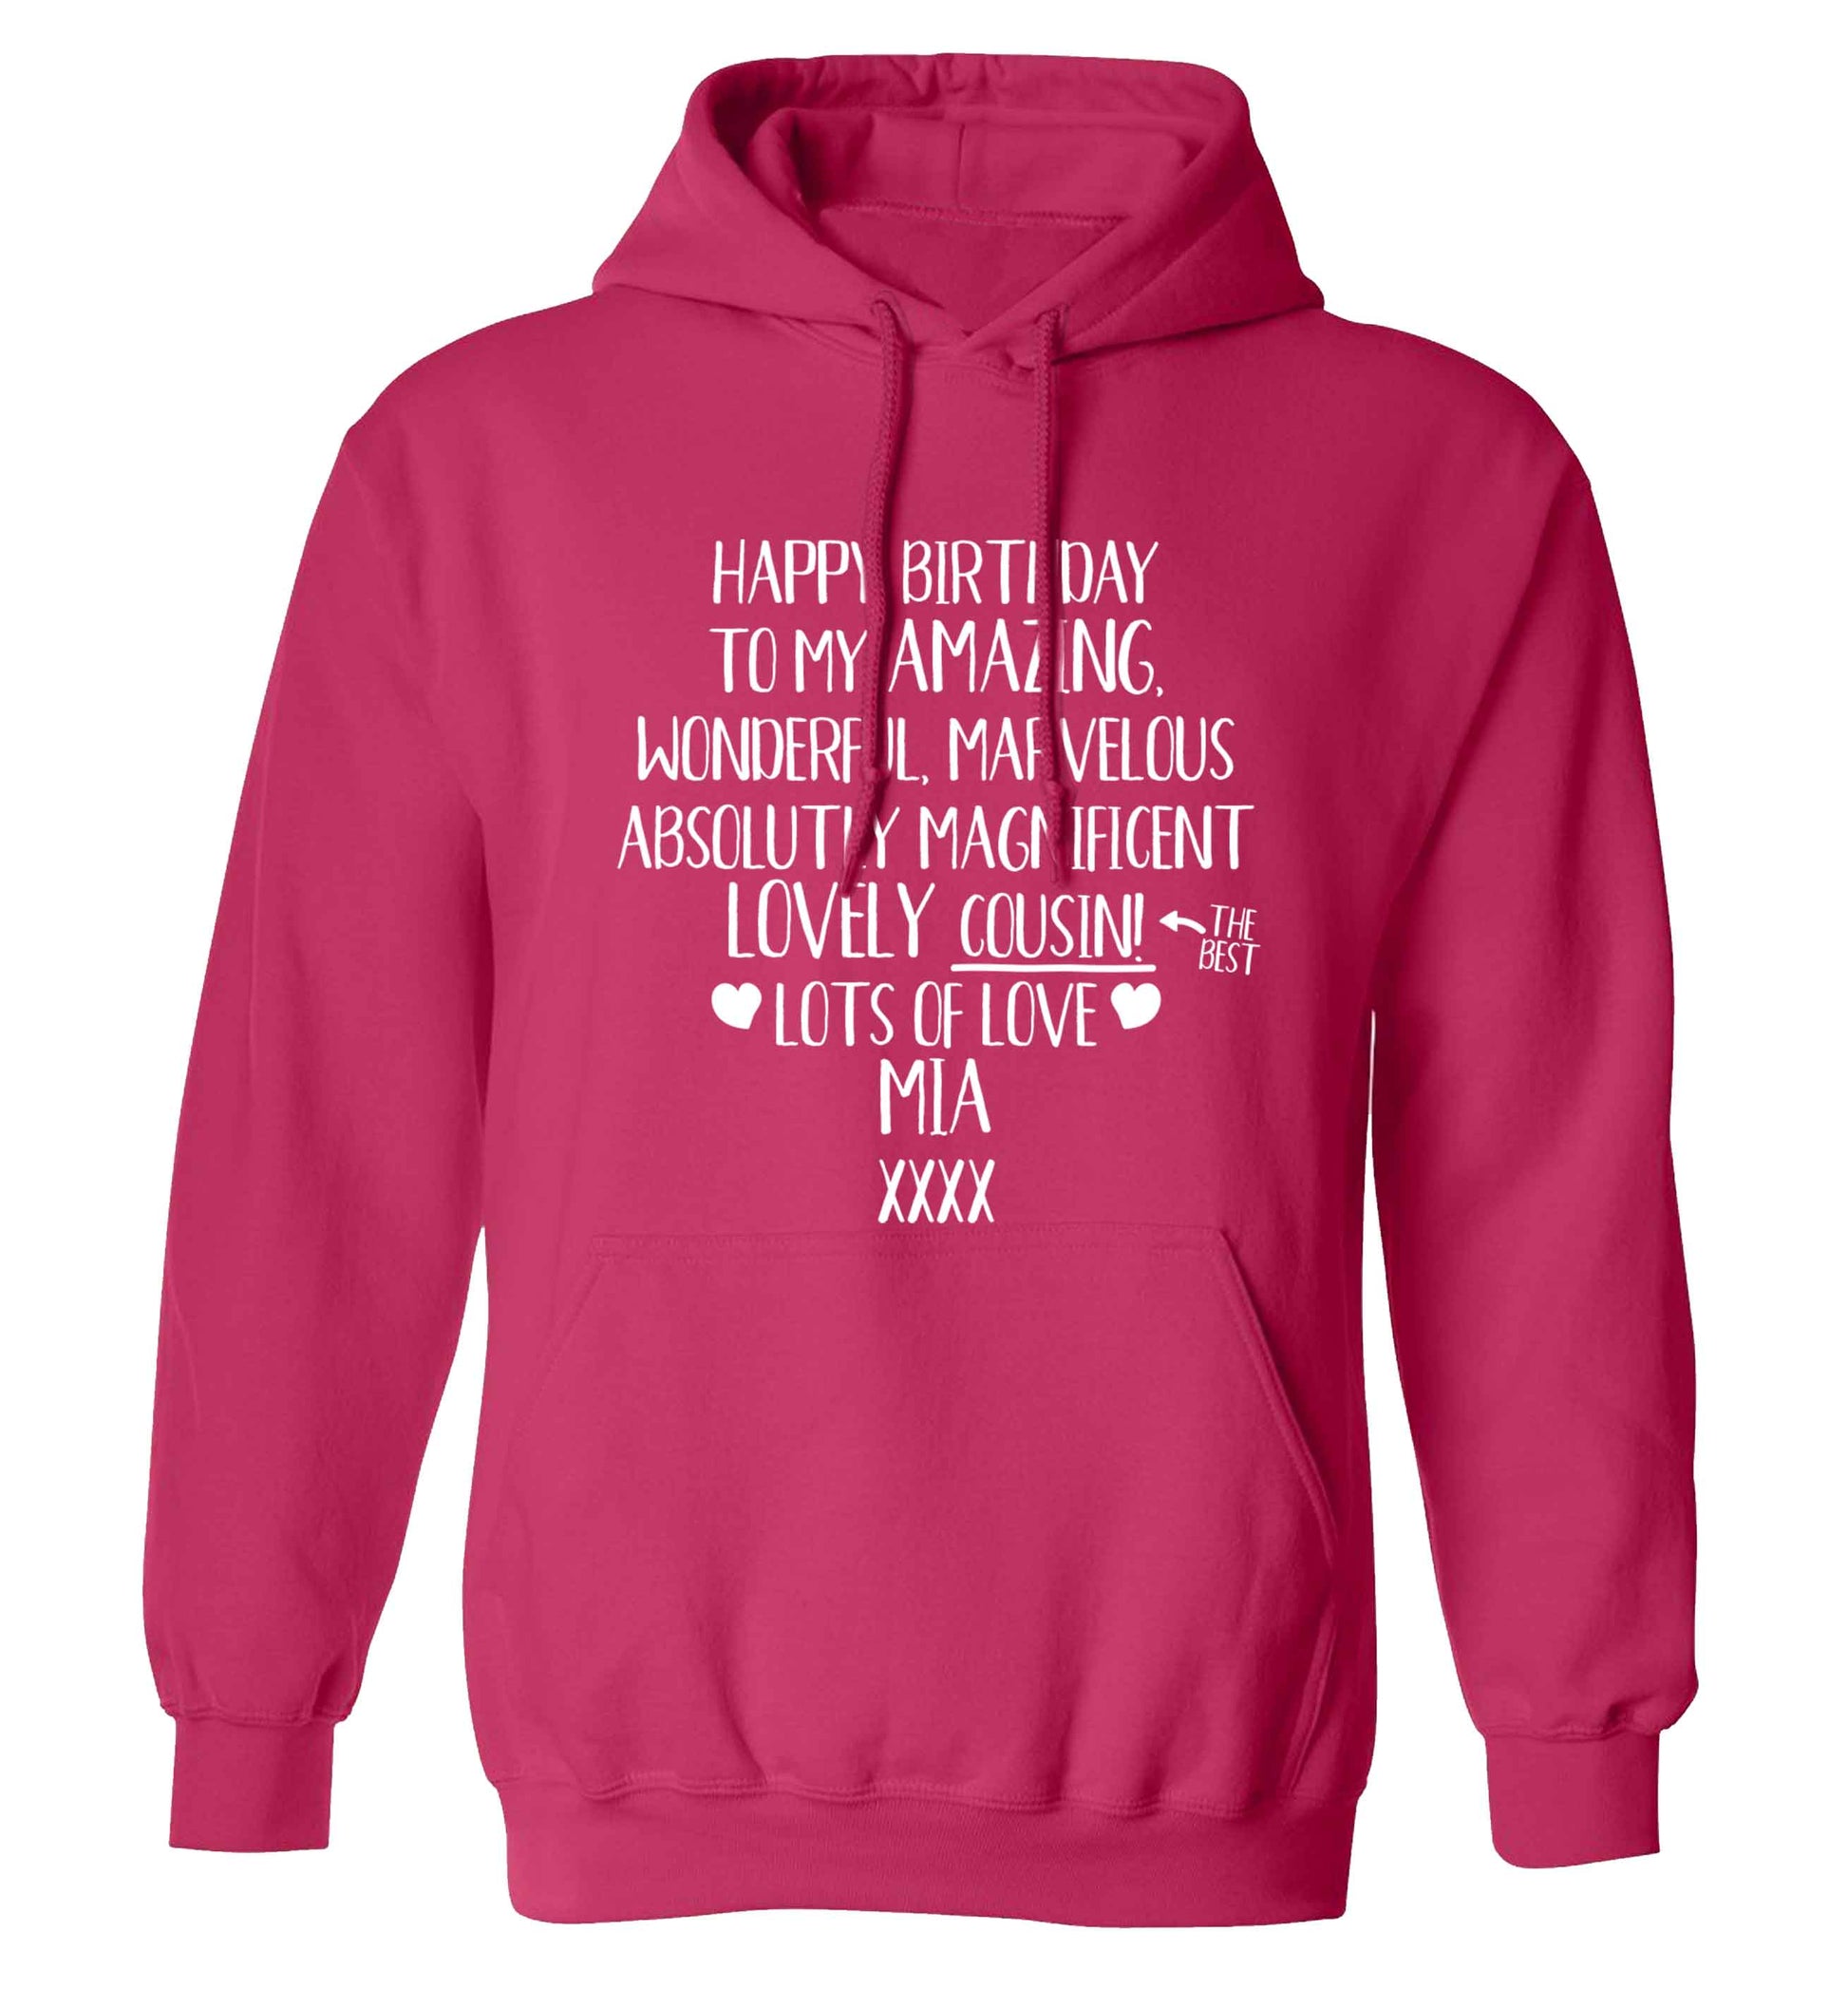 Personalised happy birthday to my amazing, wonderful, lovely cousin adults unisex pink hoodie 2XL